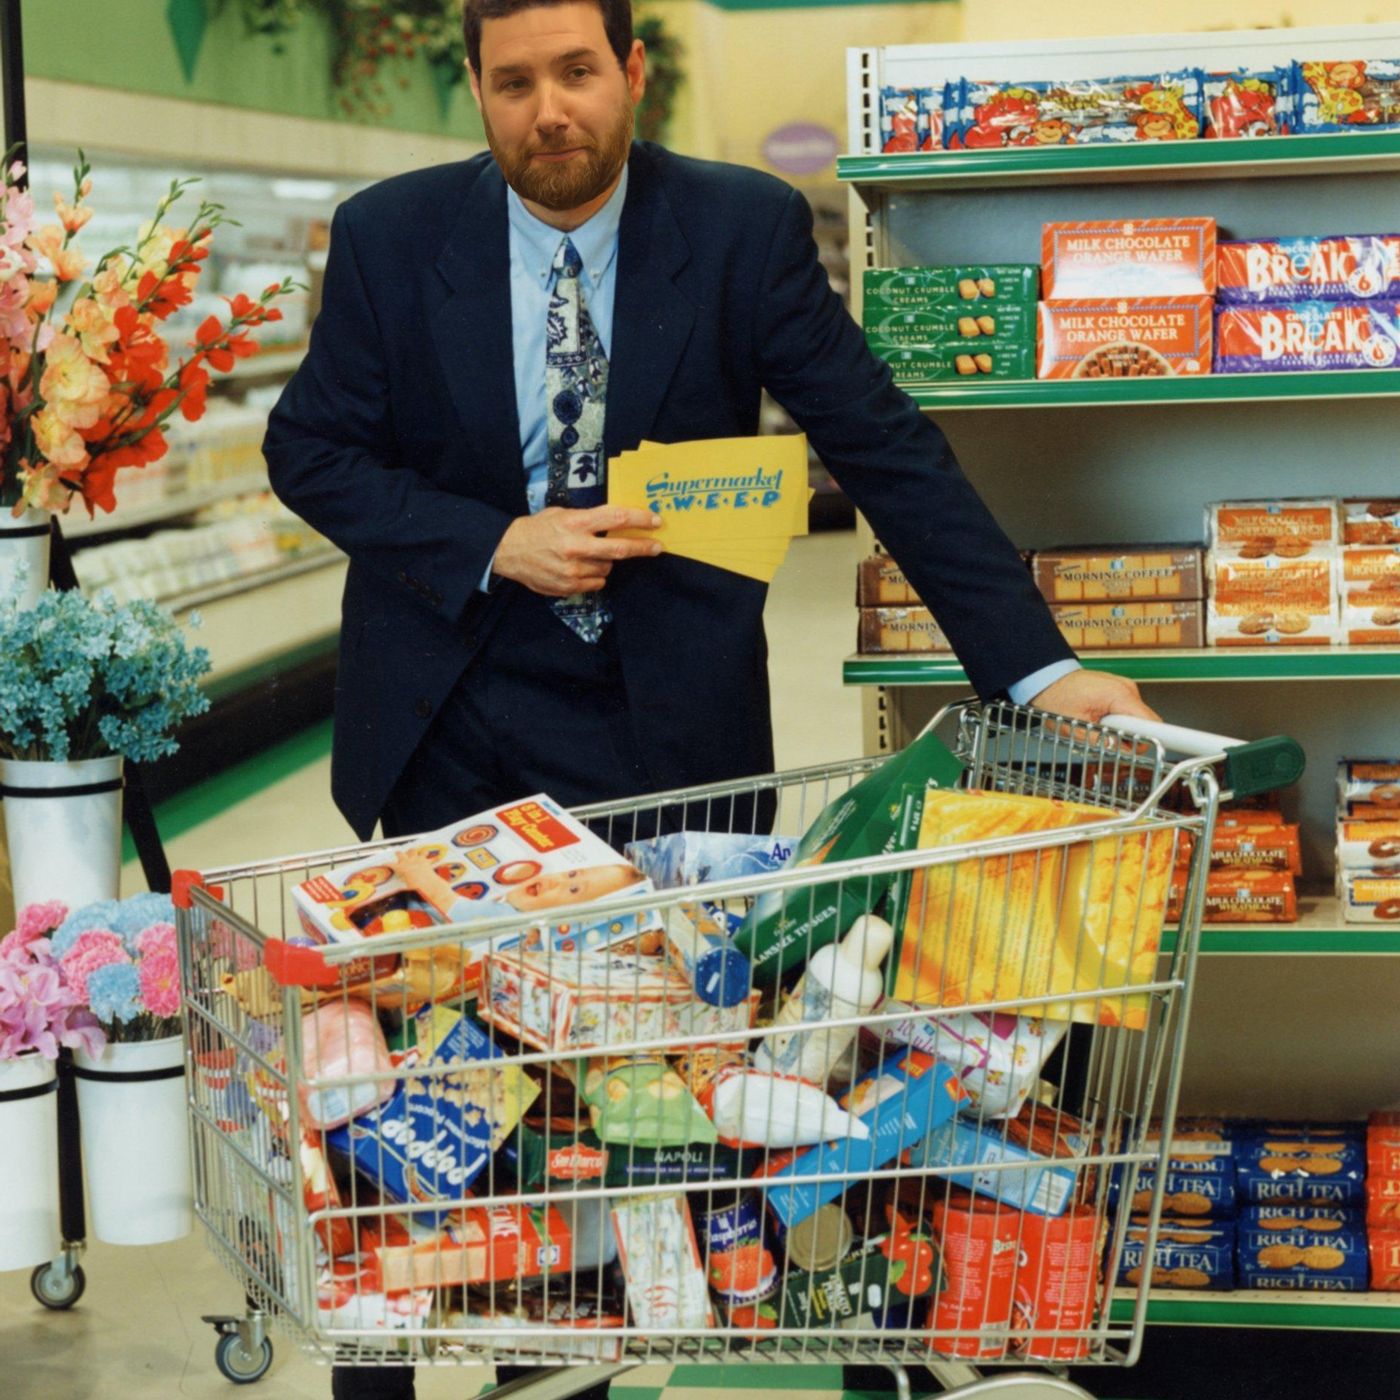 70: Supermarket sweep you off your feet